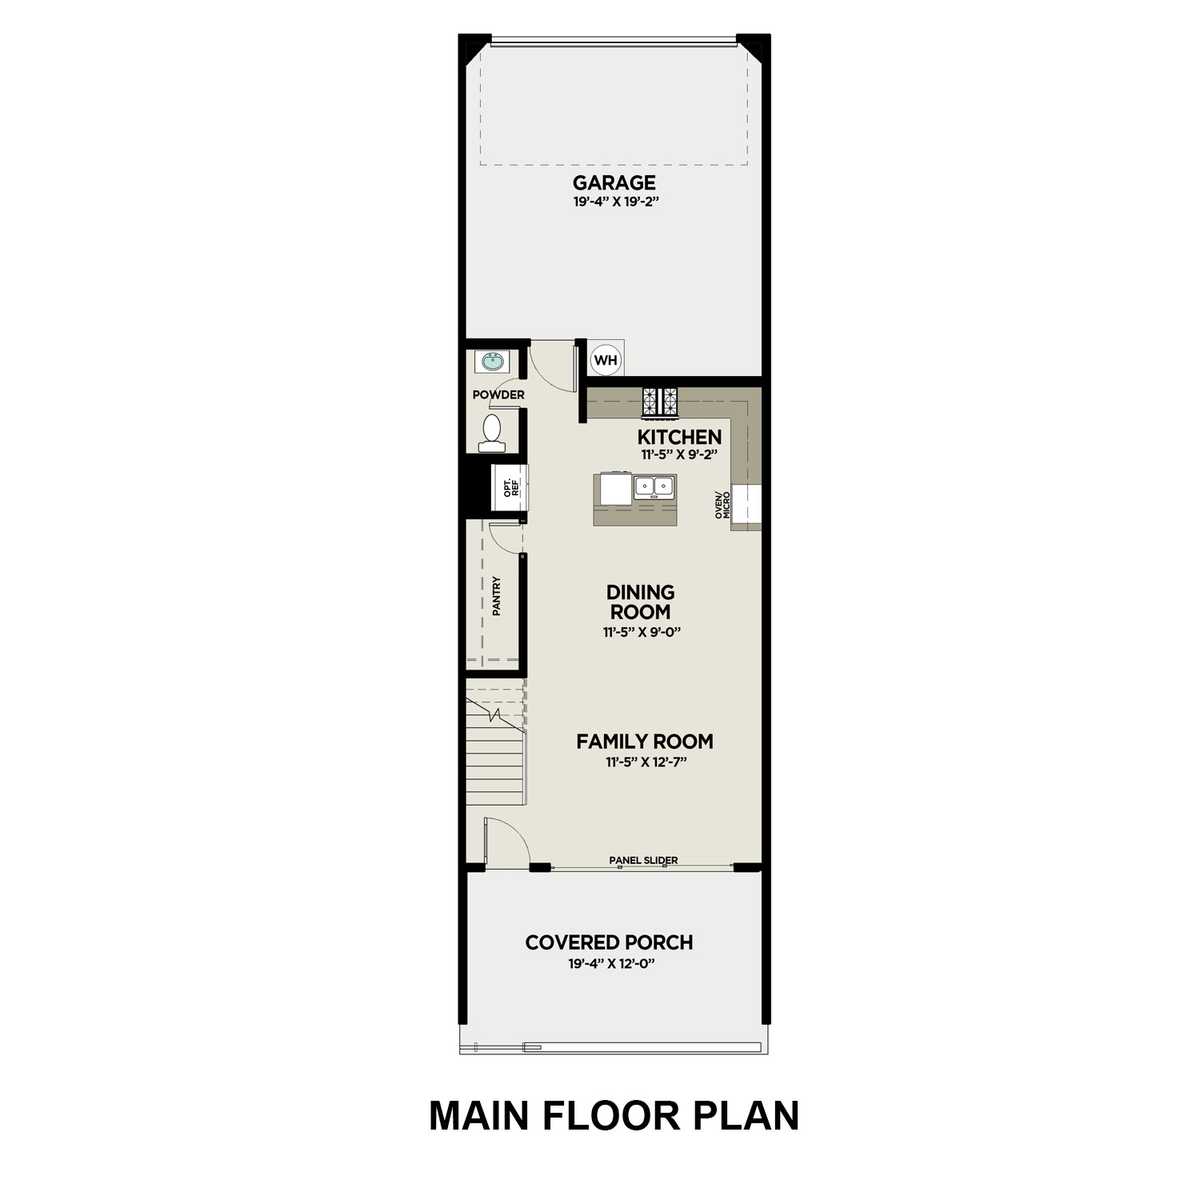 1 - The Seacrest A floor plan layout for 716 Stickley Oak Way in Davidson Homes' The Village at Towne Lake community.